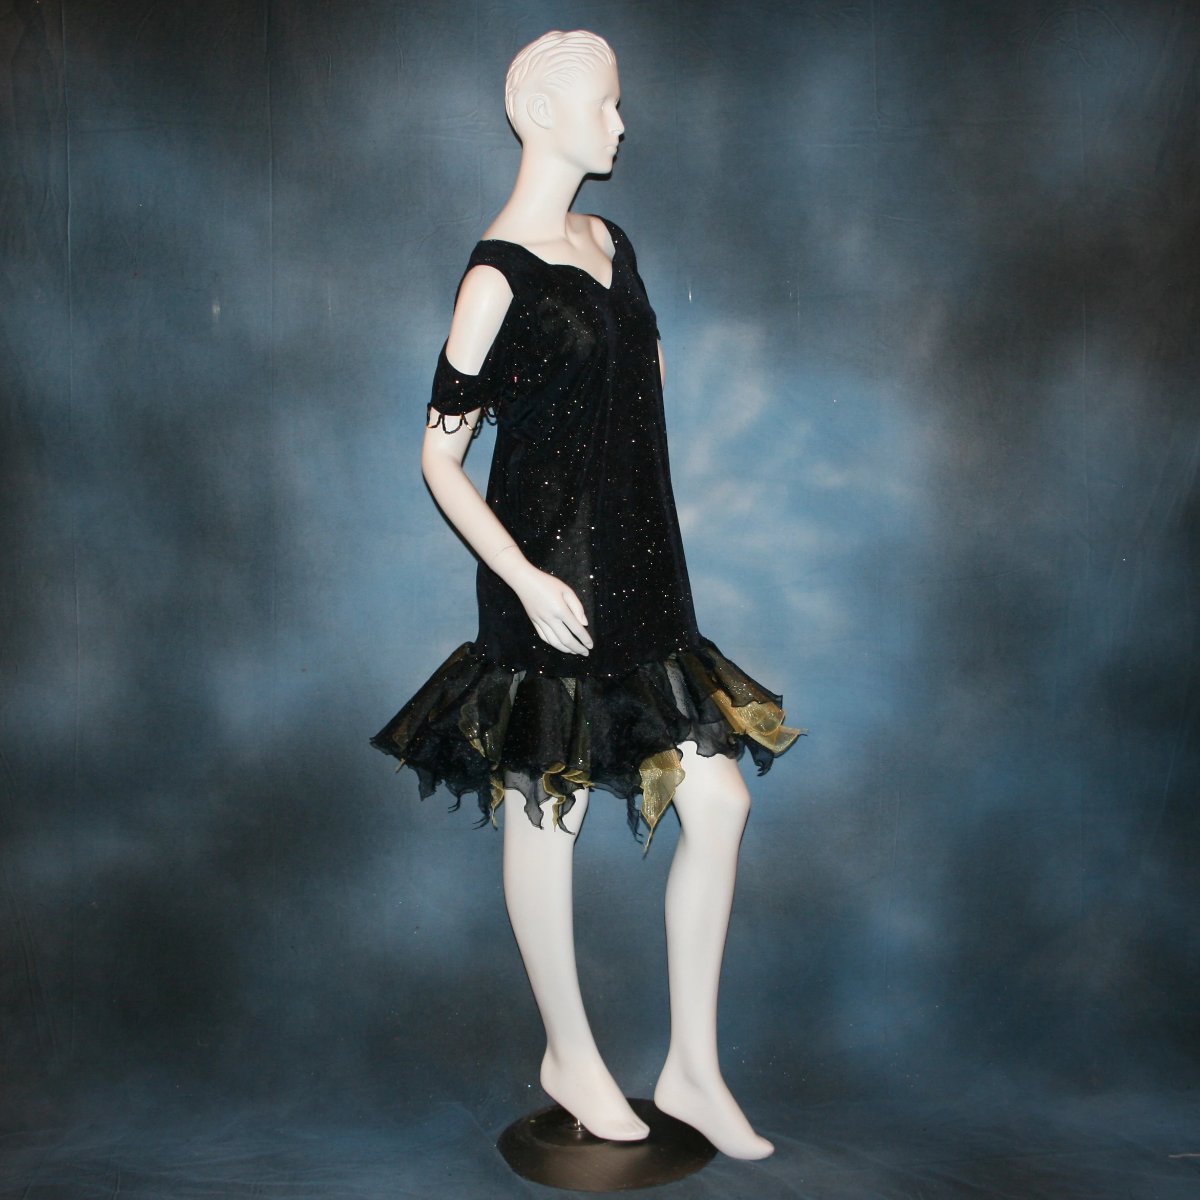 Crystal's Creations side view of Navy Latin/rhythm/social dance dress created in navy glitter slinky fabric with oodles of glitter organza flounces of navy & soft yellow, with hand beading at sleeve edges & back peek-a-boo. A great social ballroom dress for any special occasion, as well as a Latin/rhythm dance dress!